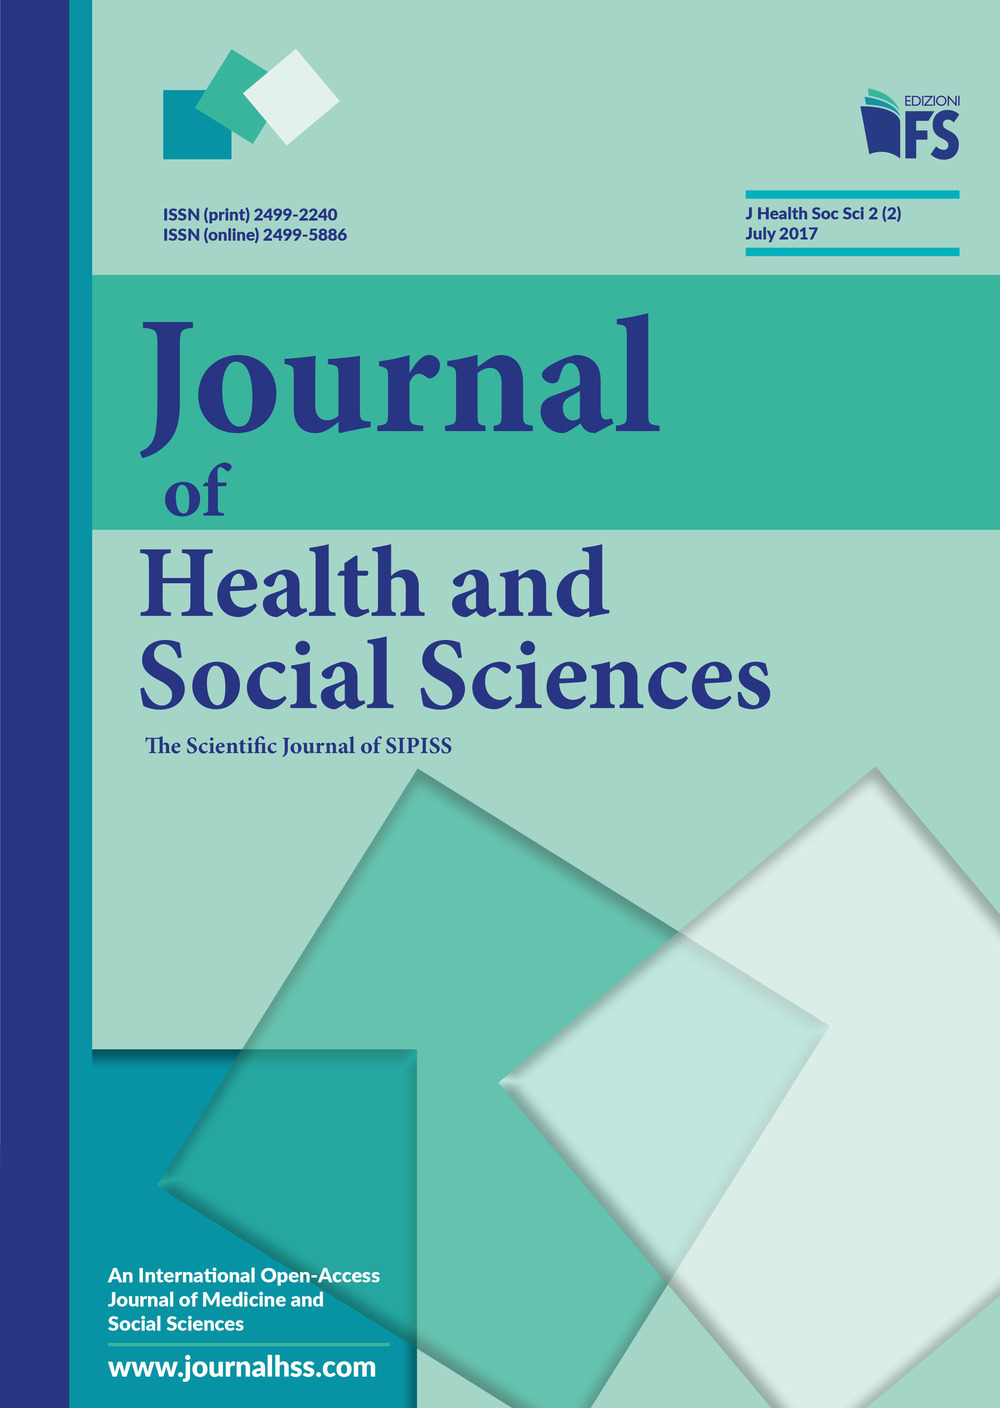 Journal of health and social sciences (2017). Vol. 2: July